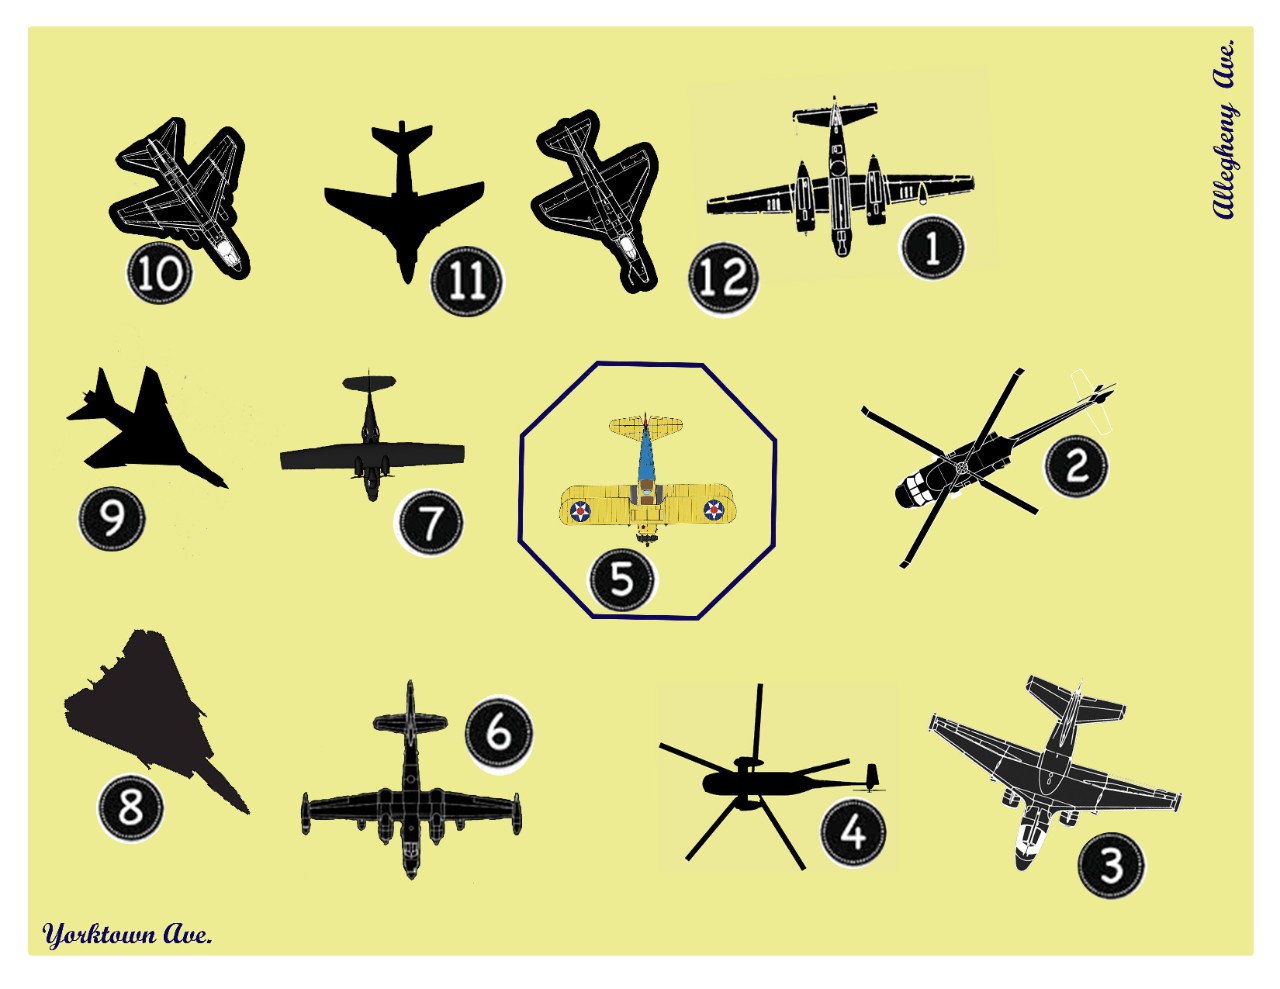 aircraft layout heritage park